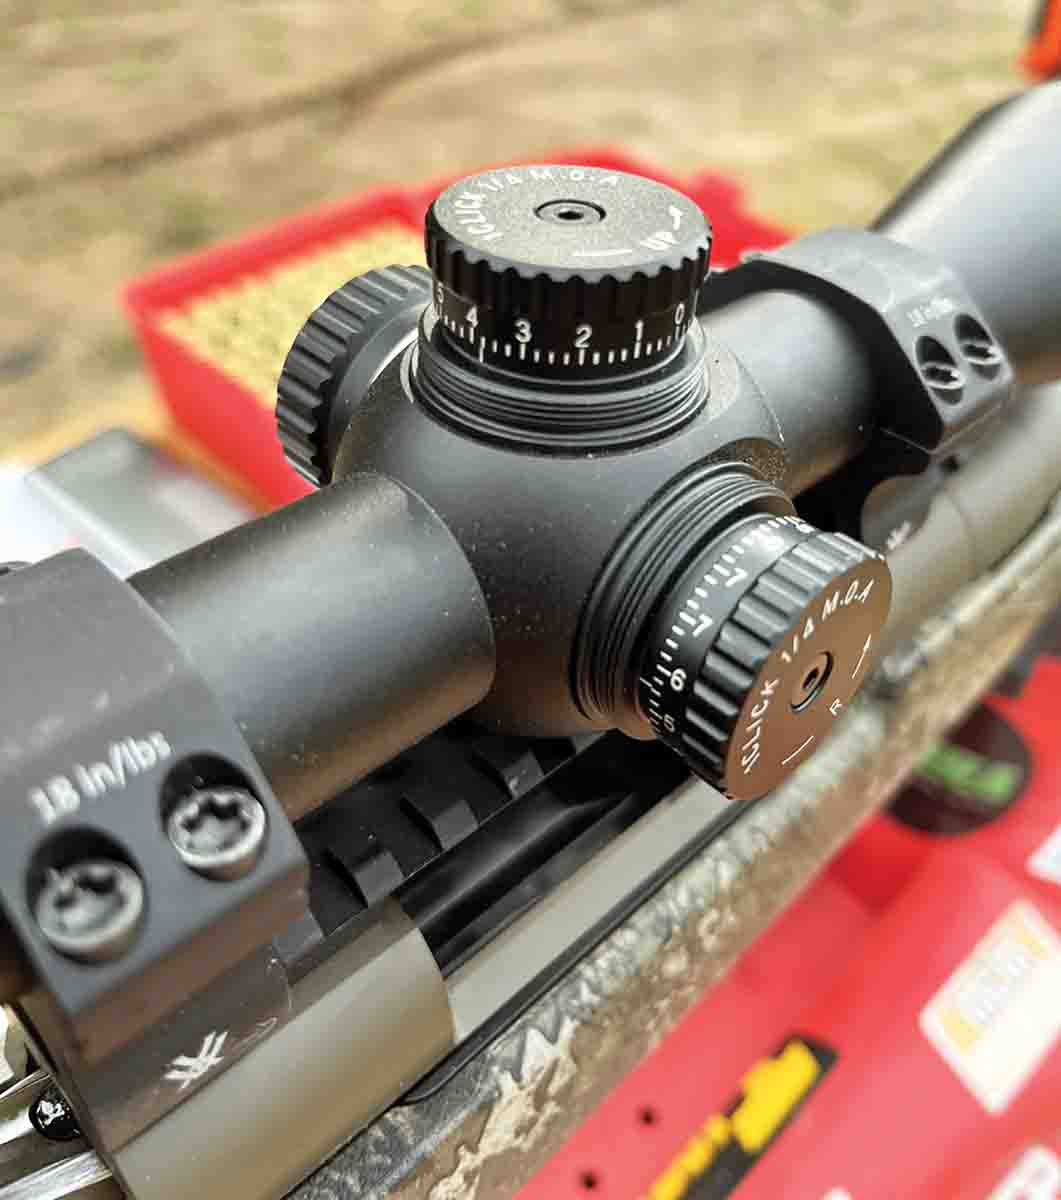 The turrets on Riton’s 1 Primal 4-16x 44mm scope are covered by aluminum screw caps, but once uncovered, they function perfectly for dialing corrections for long-range shooting.